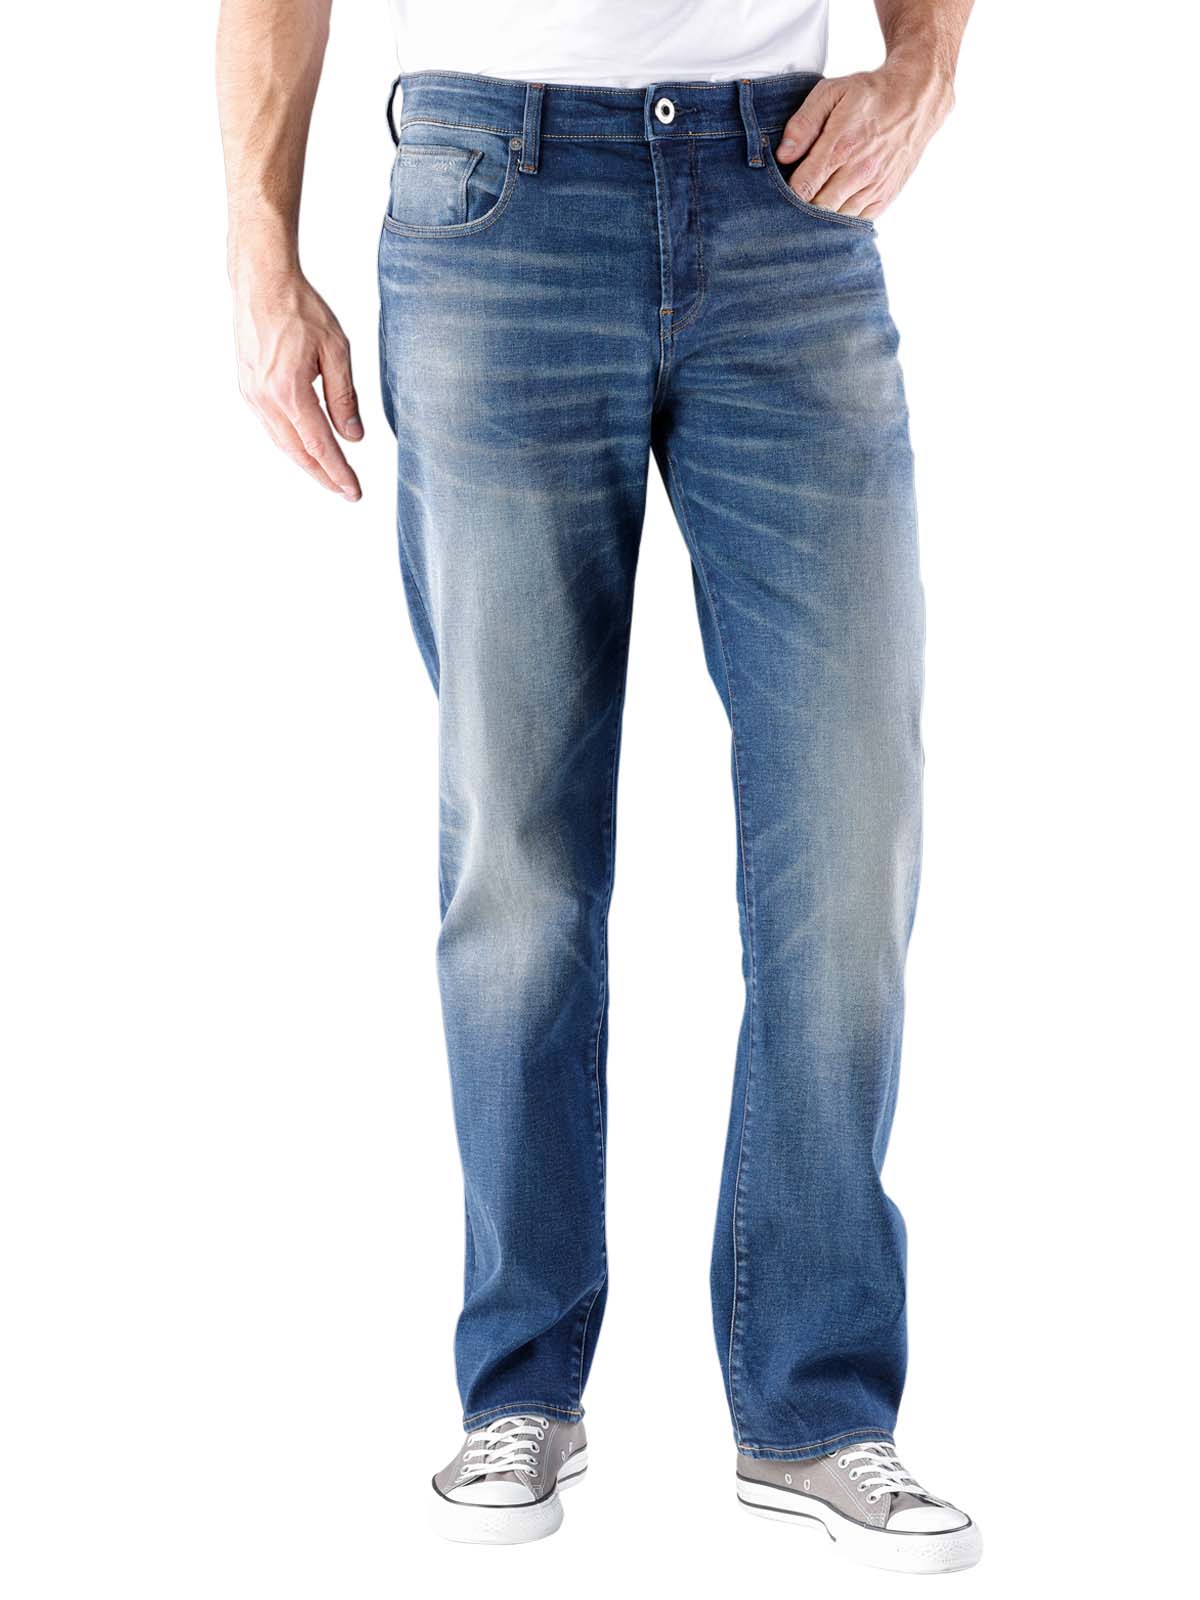 g star worker jeans